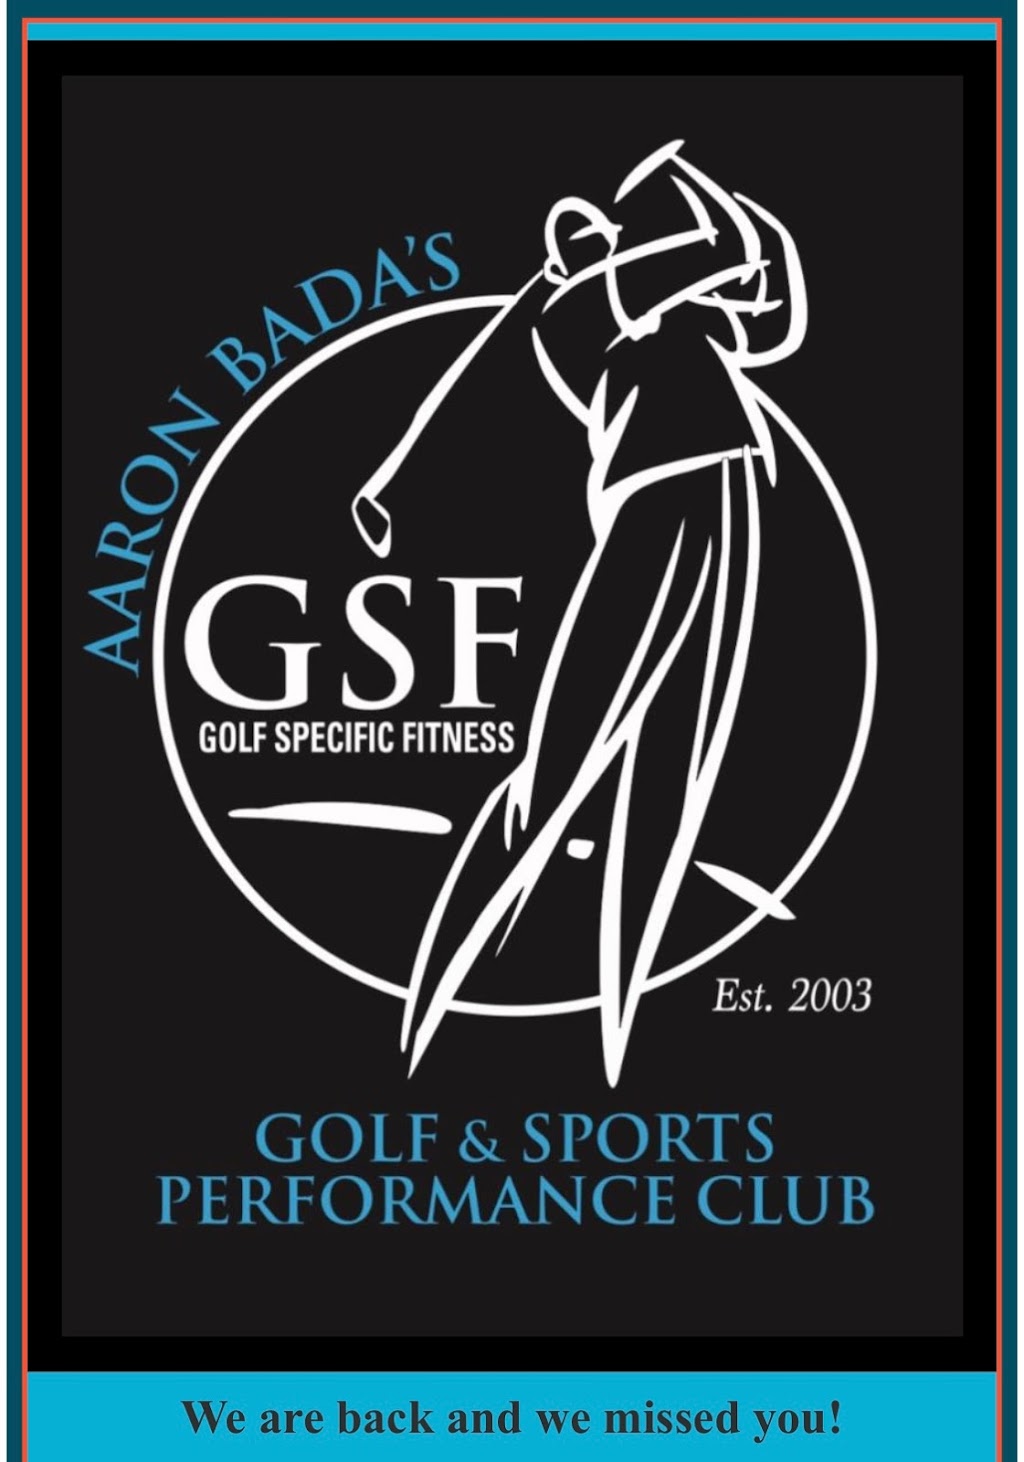 Golf Specific Fitness | 450 Bay Ave, Somers Point, NJ 08244 | Phone: (609) 338-7599